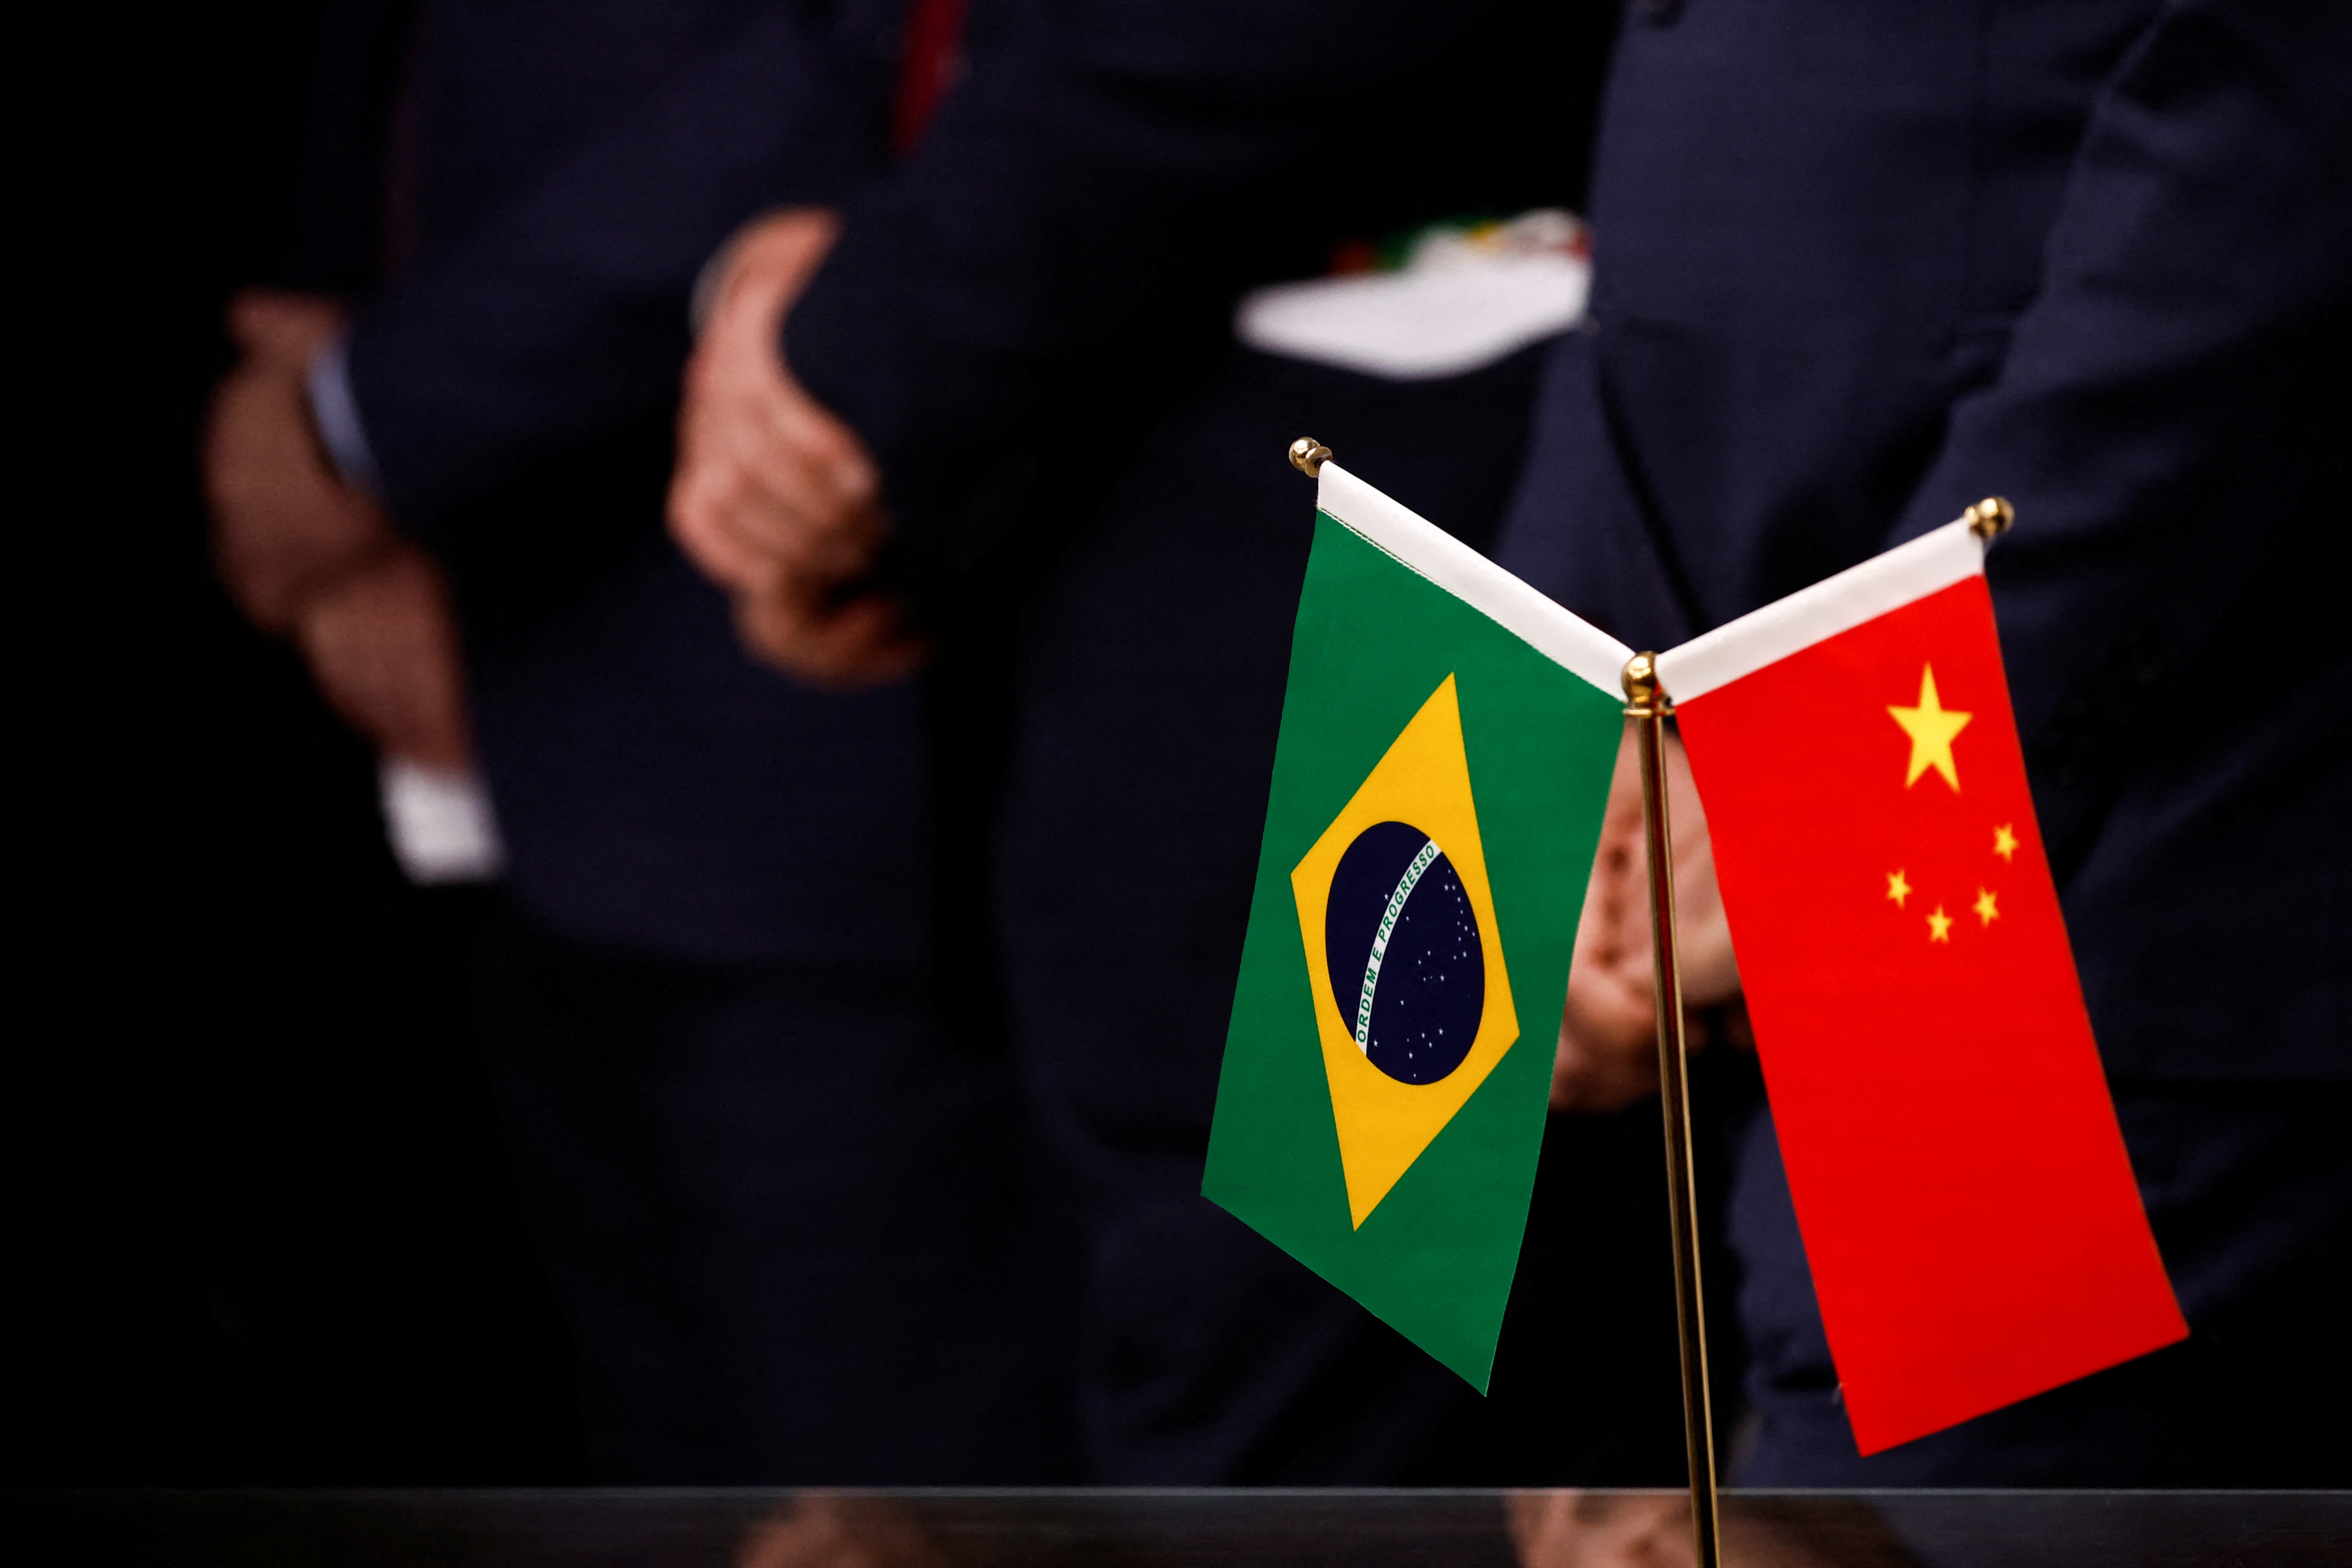 Flags are seen as Brazil's President Luiz Inacio Lula da Silva holds a news conference following his meeting with Chinese President Xi Jinping, at the Brazilian Embassy in Beijing, China April 14, 2023. REUTERS/Tingshu Wang/Pool